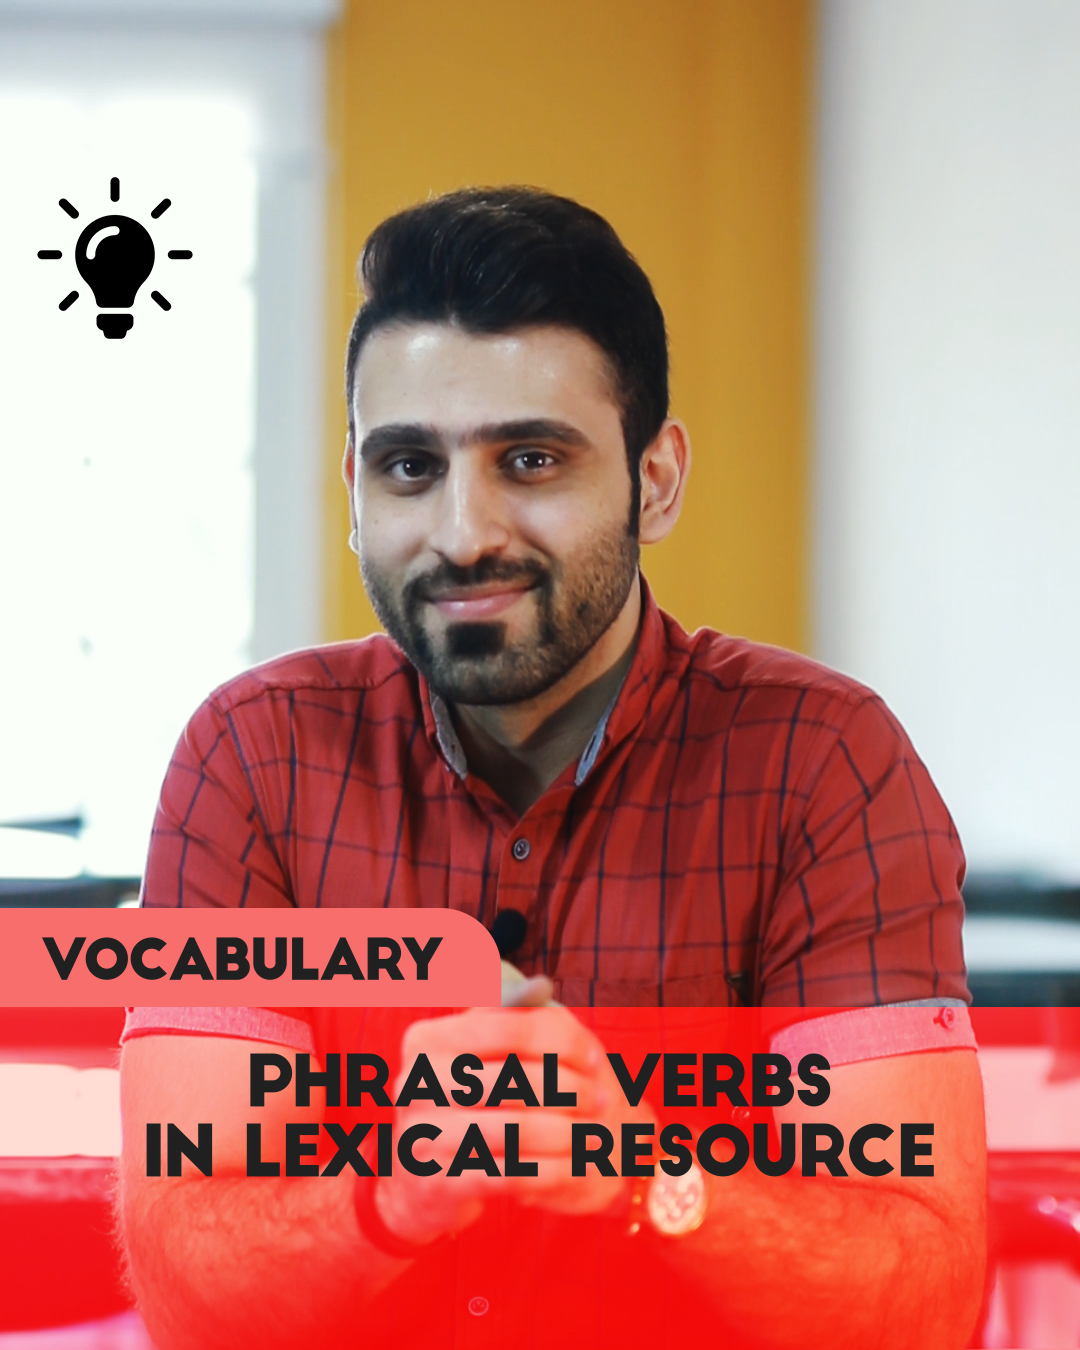 Phrasal verbs in Lexical Resource